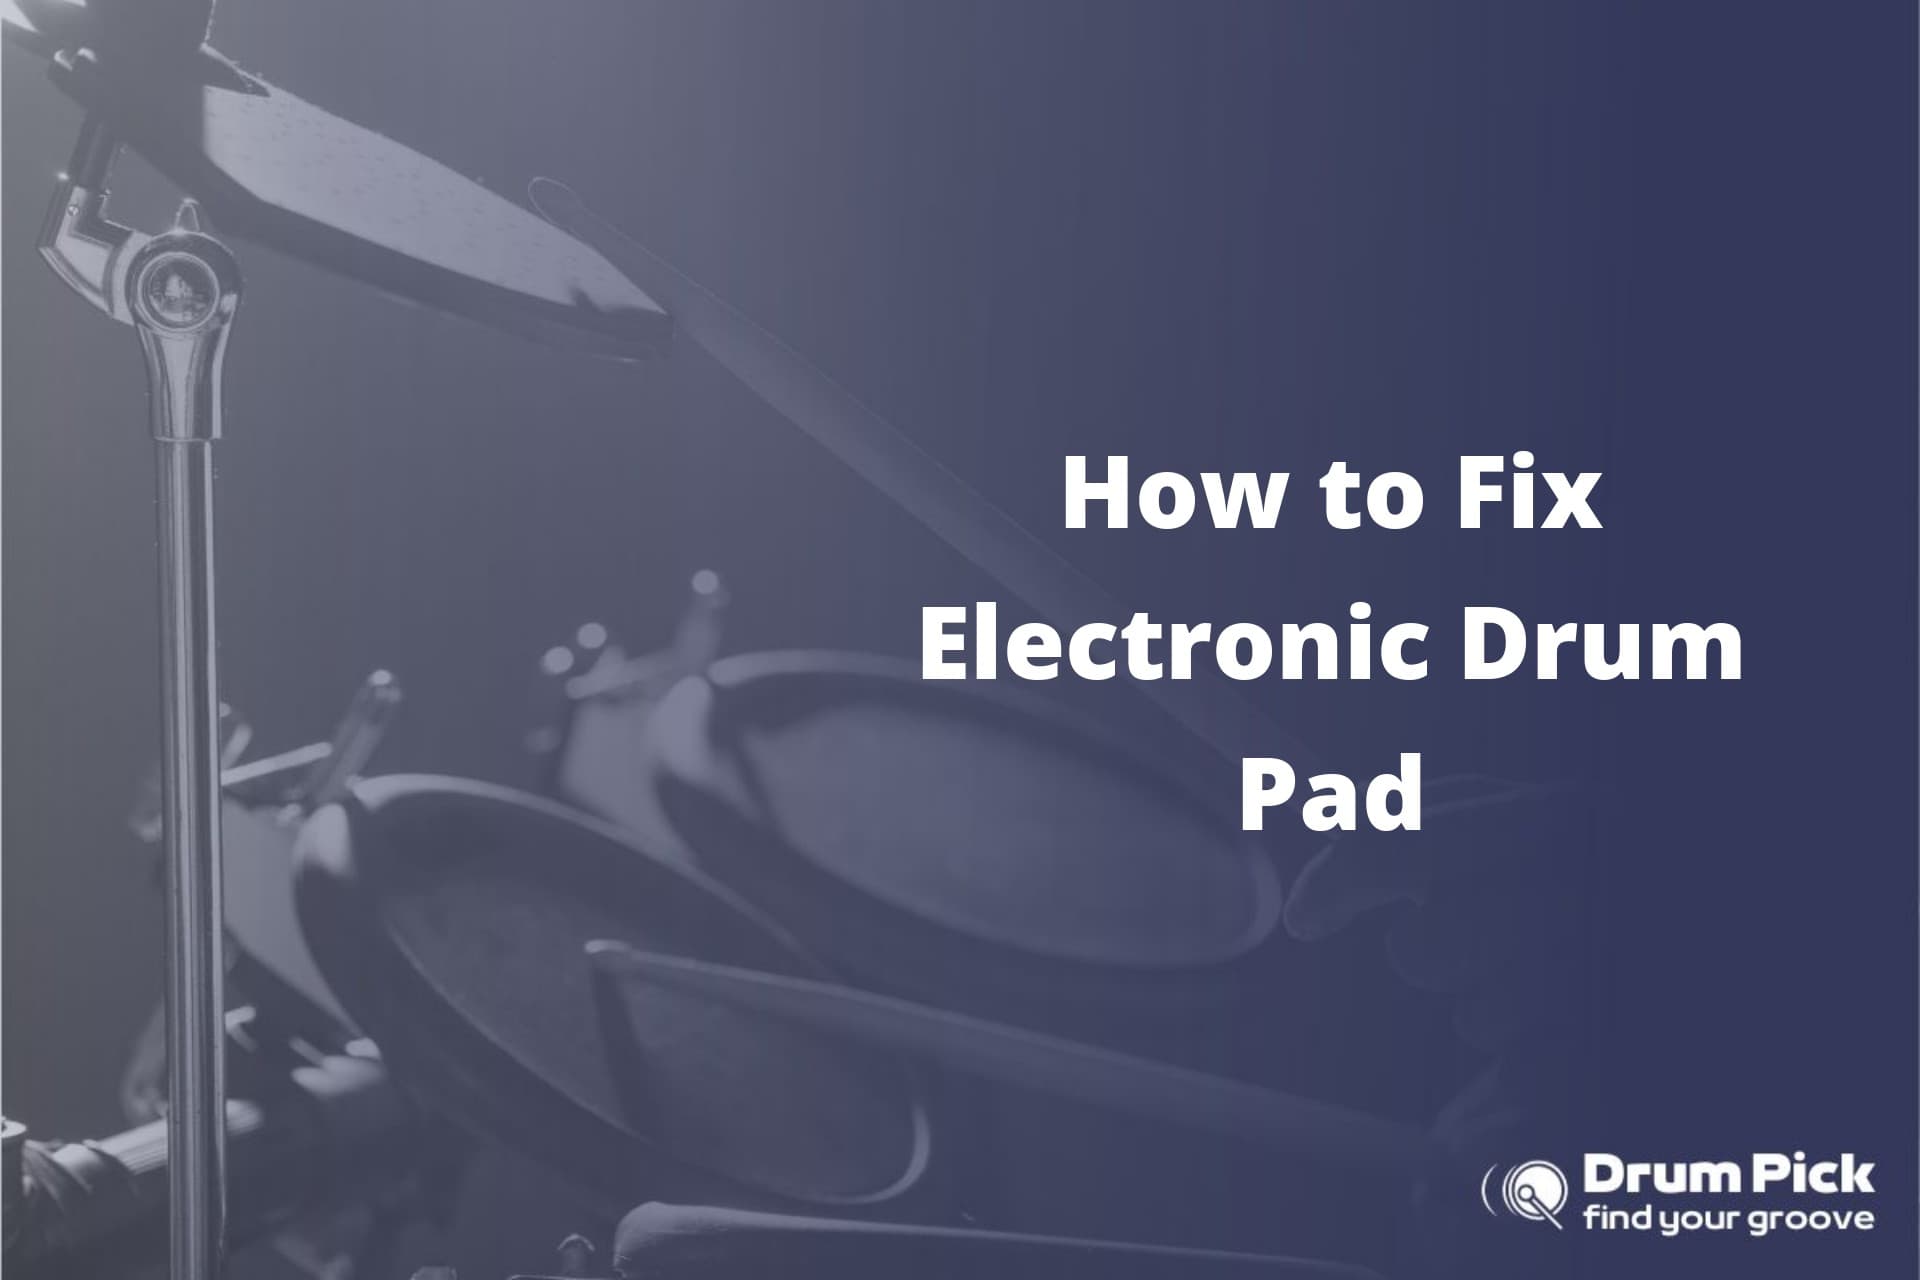 How to Fix Electronic Drum Pad